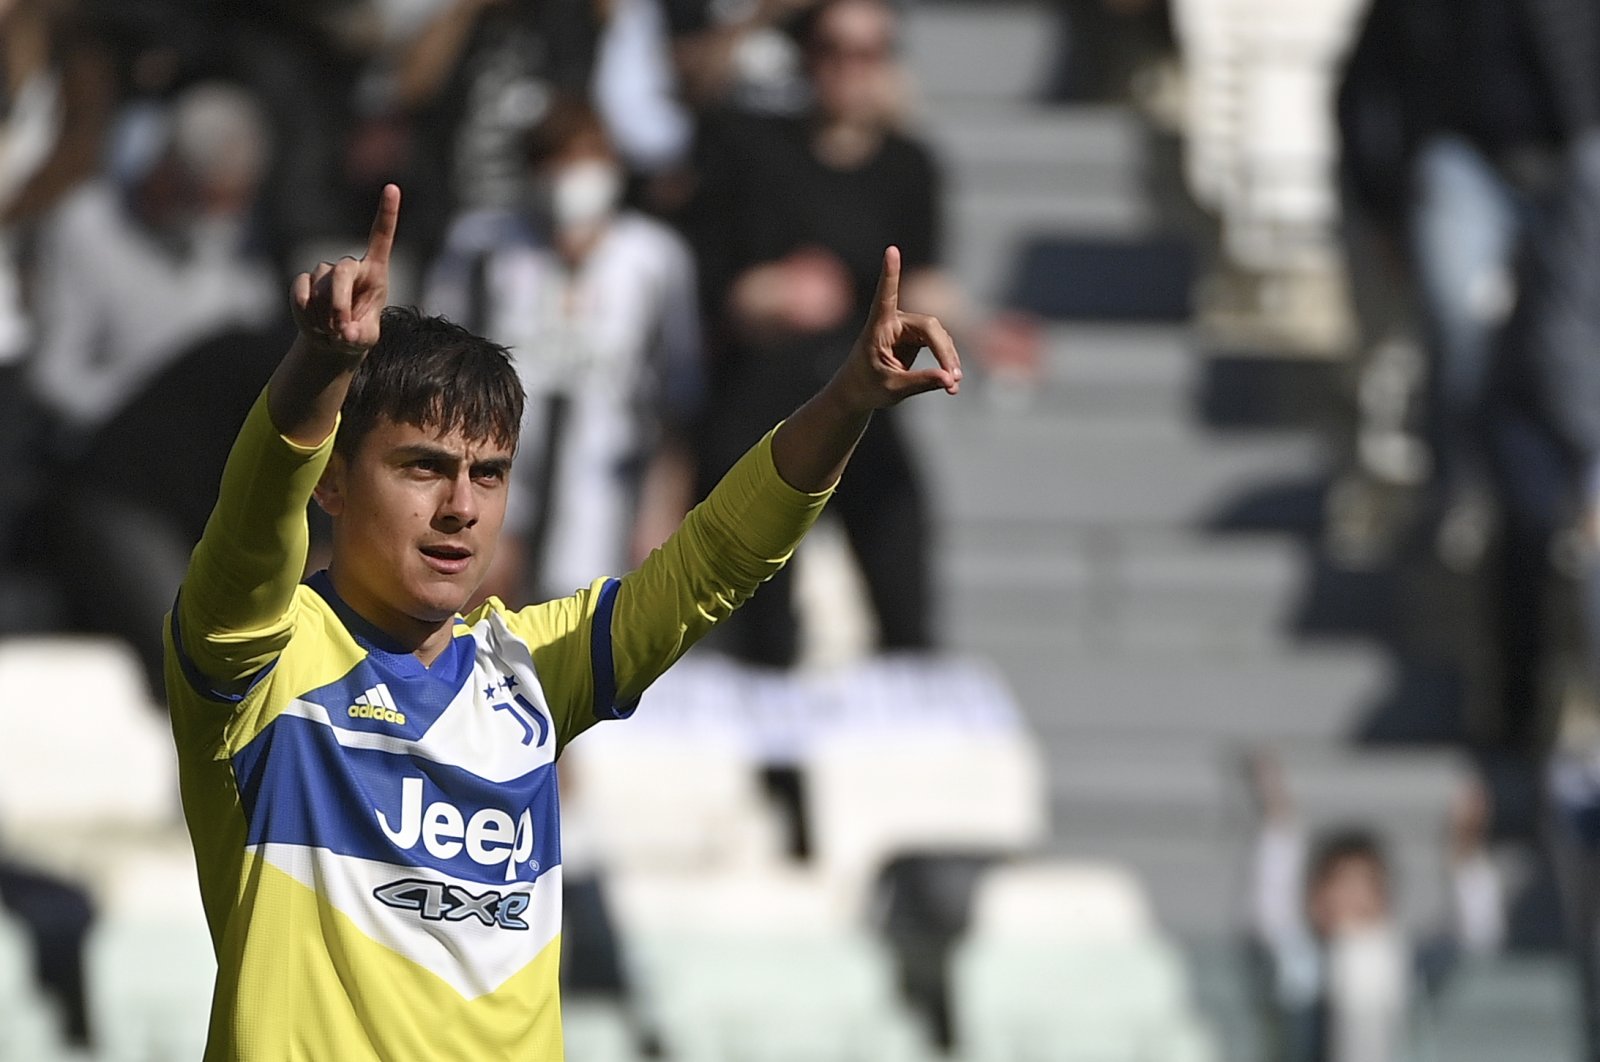 Juventus&#039; Paulo Dybala celebrates after scoring in a Serie A match against Salernitana, Turin, Italy, March 20, 2021. (AP Photo)